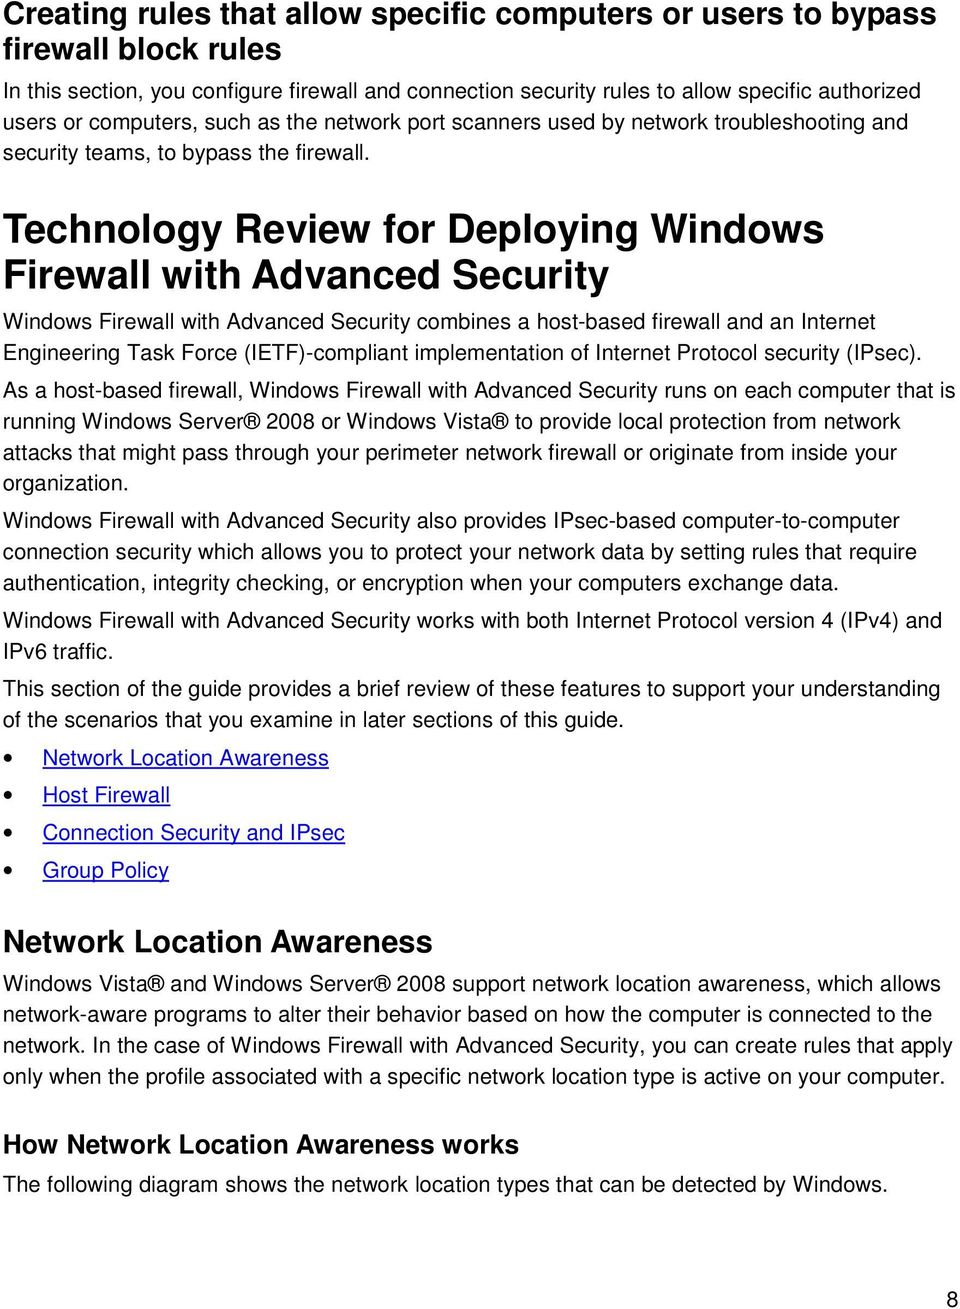 Technology Review for Deploying Windows Firewall with Advanced Security Windows Firewall with Advanced Security combines a host-based firewall and an Internet Engineering Task Force (IETF)-compliant